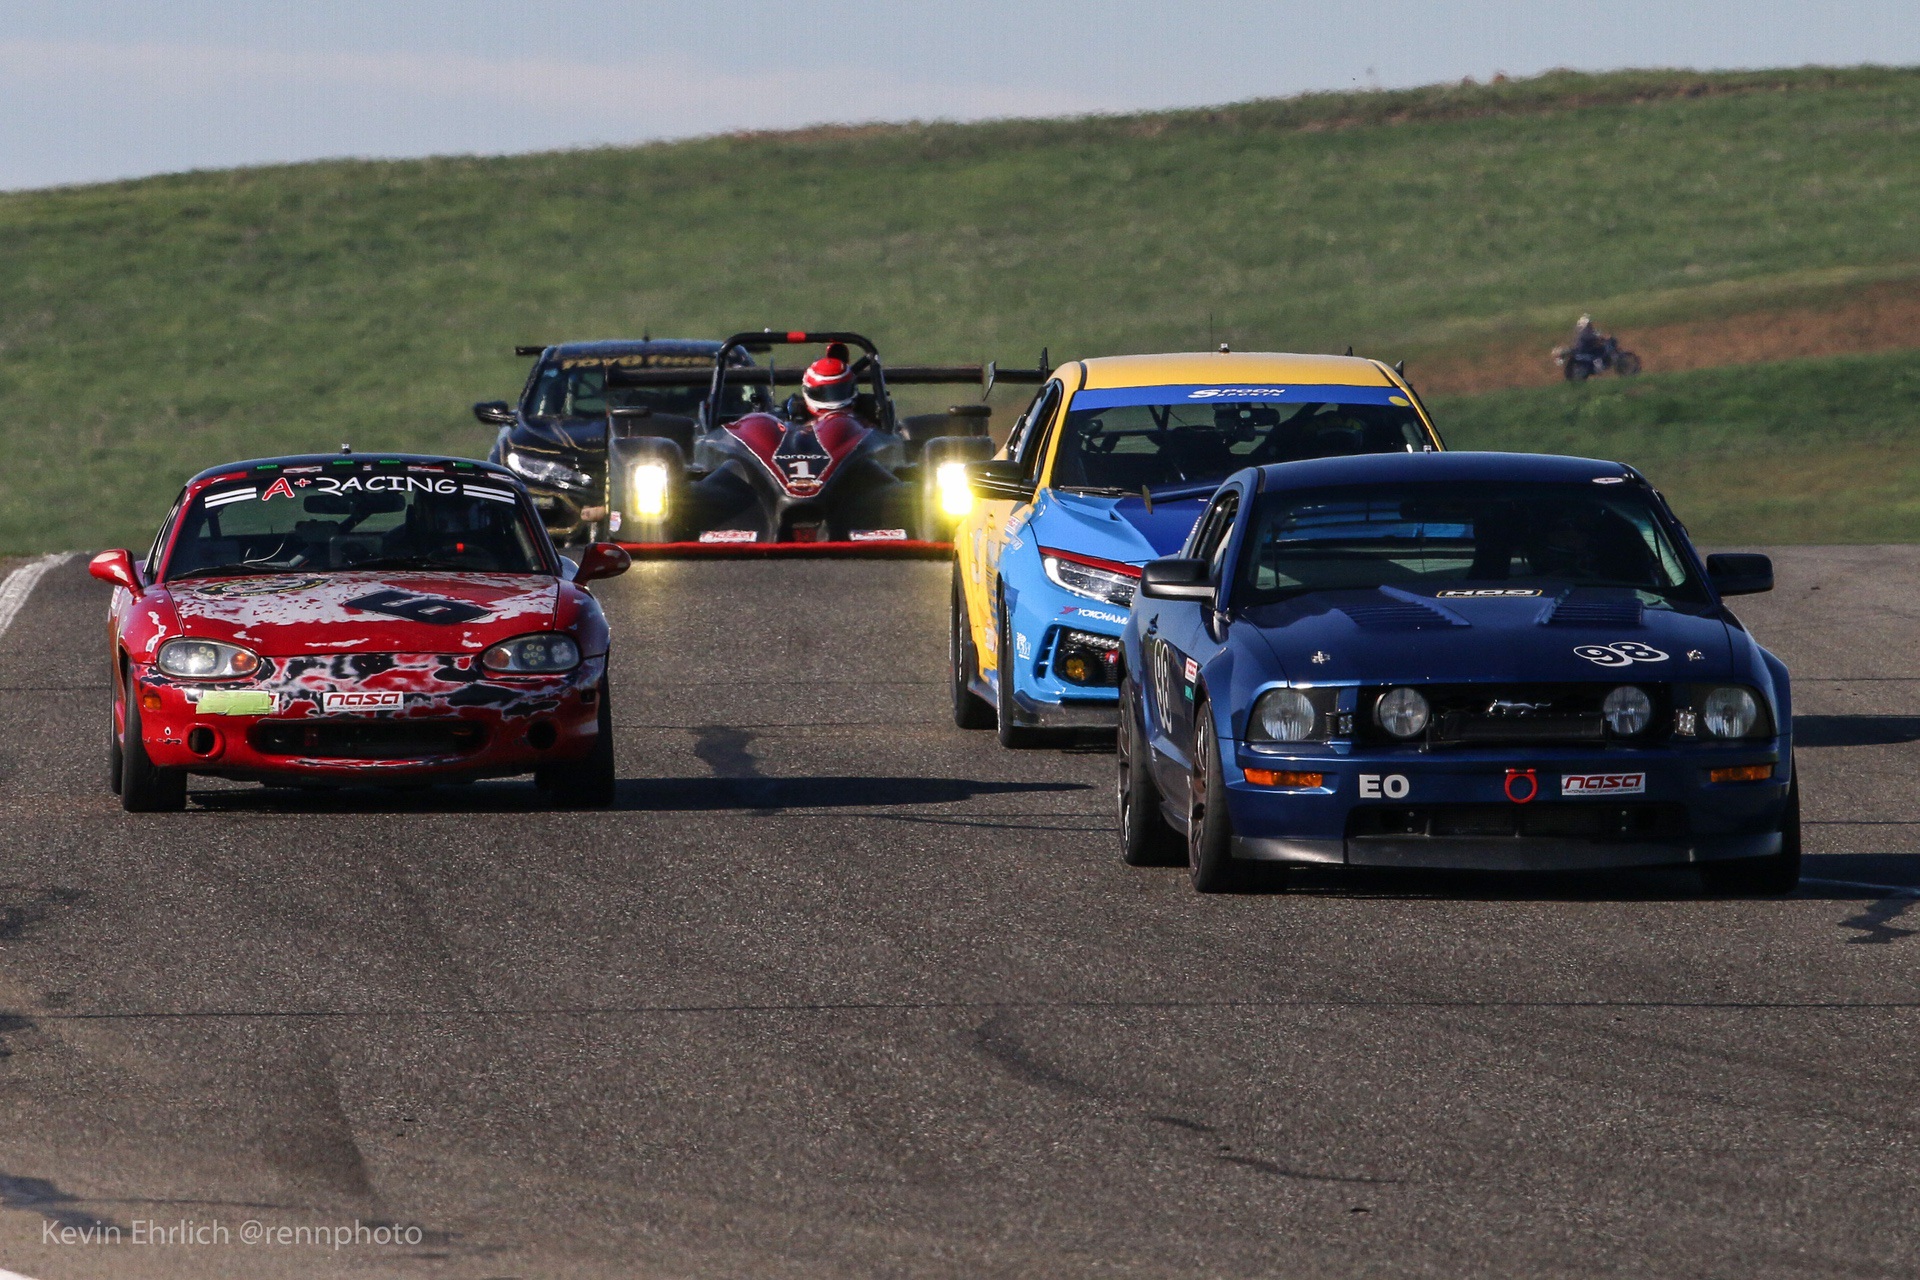 2008 Ford Mustang in front of other cars at Thunderhill 2021